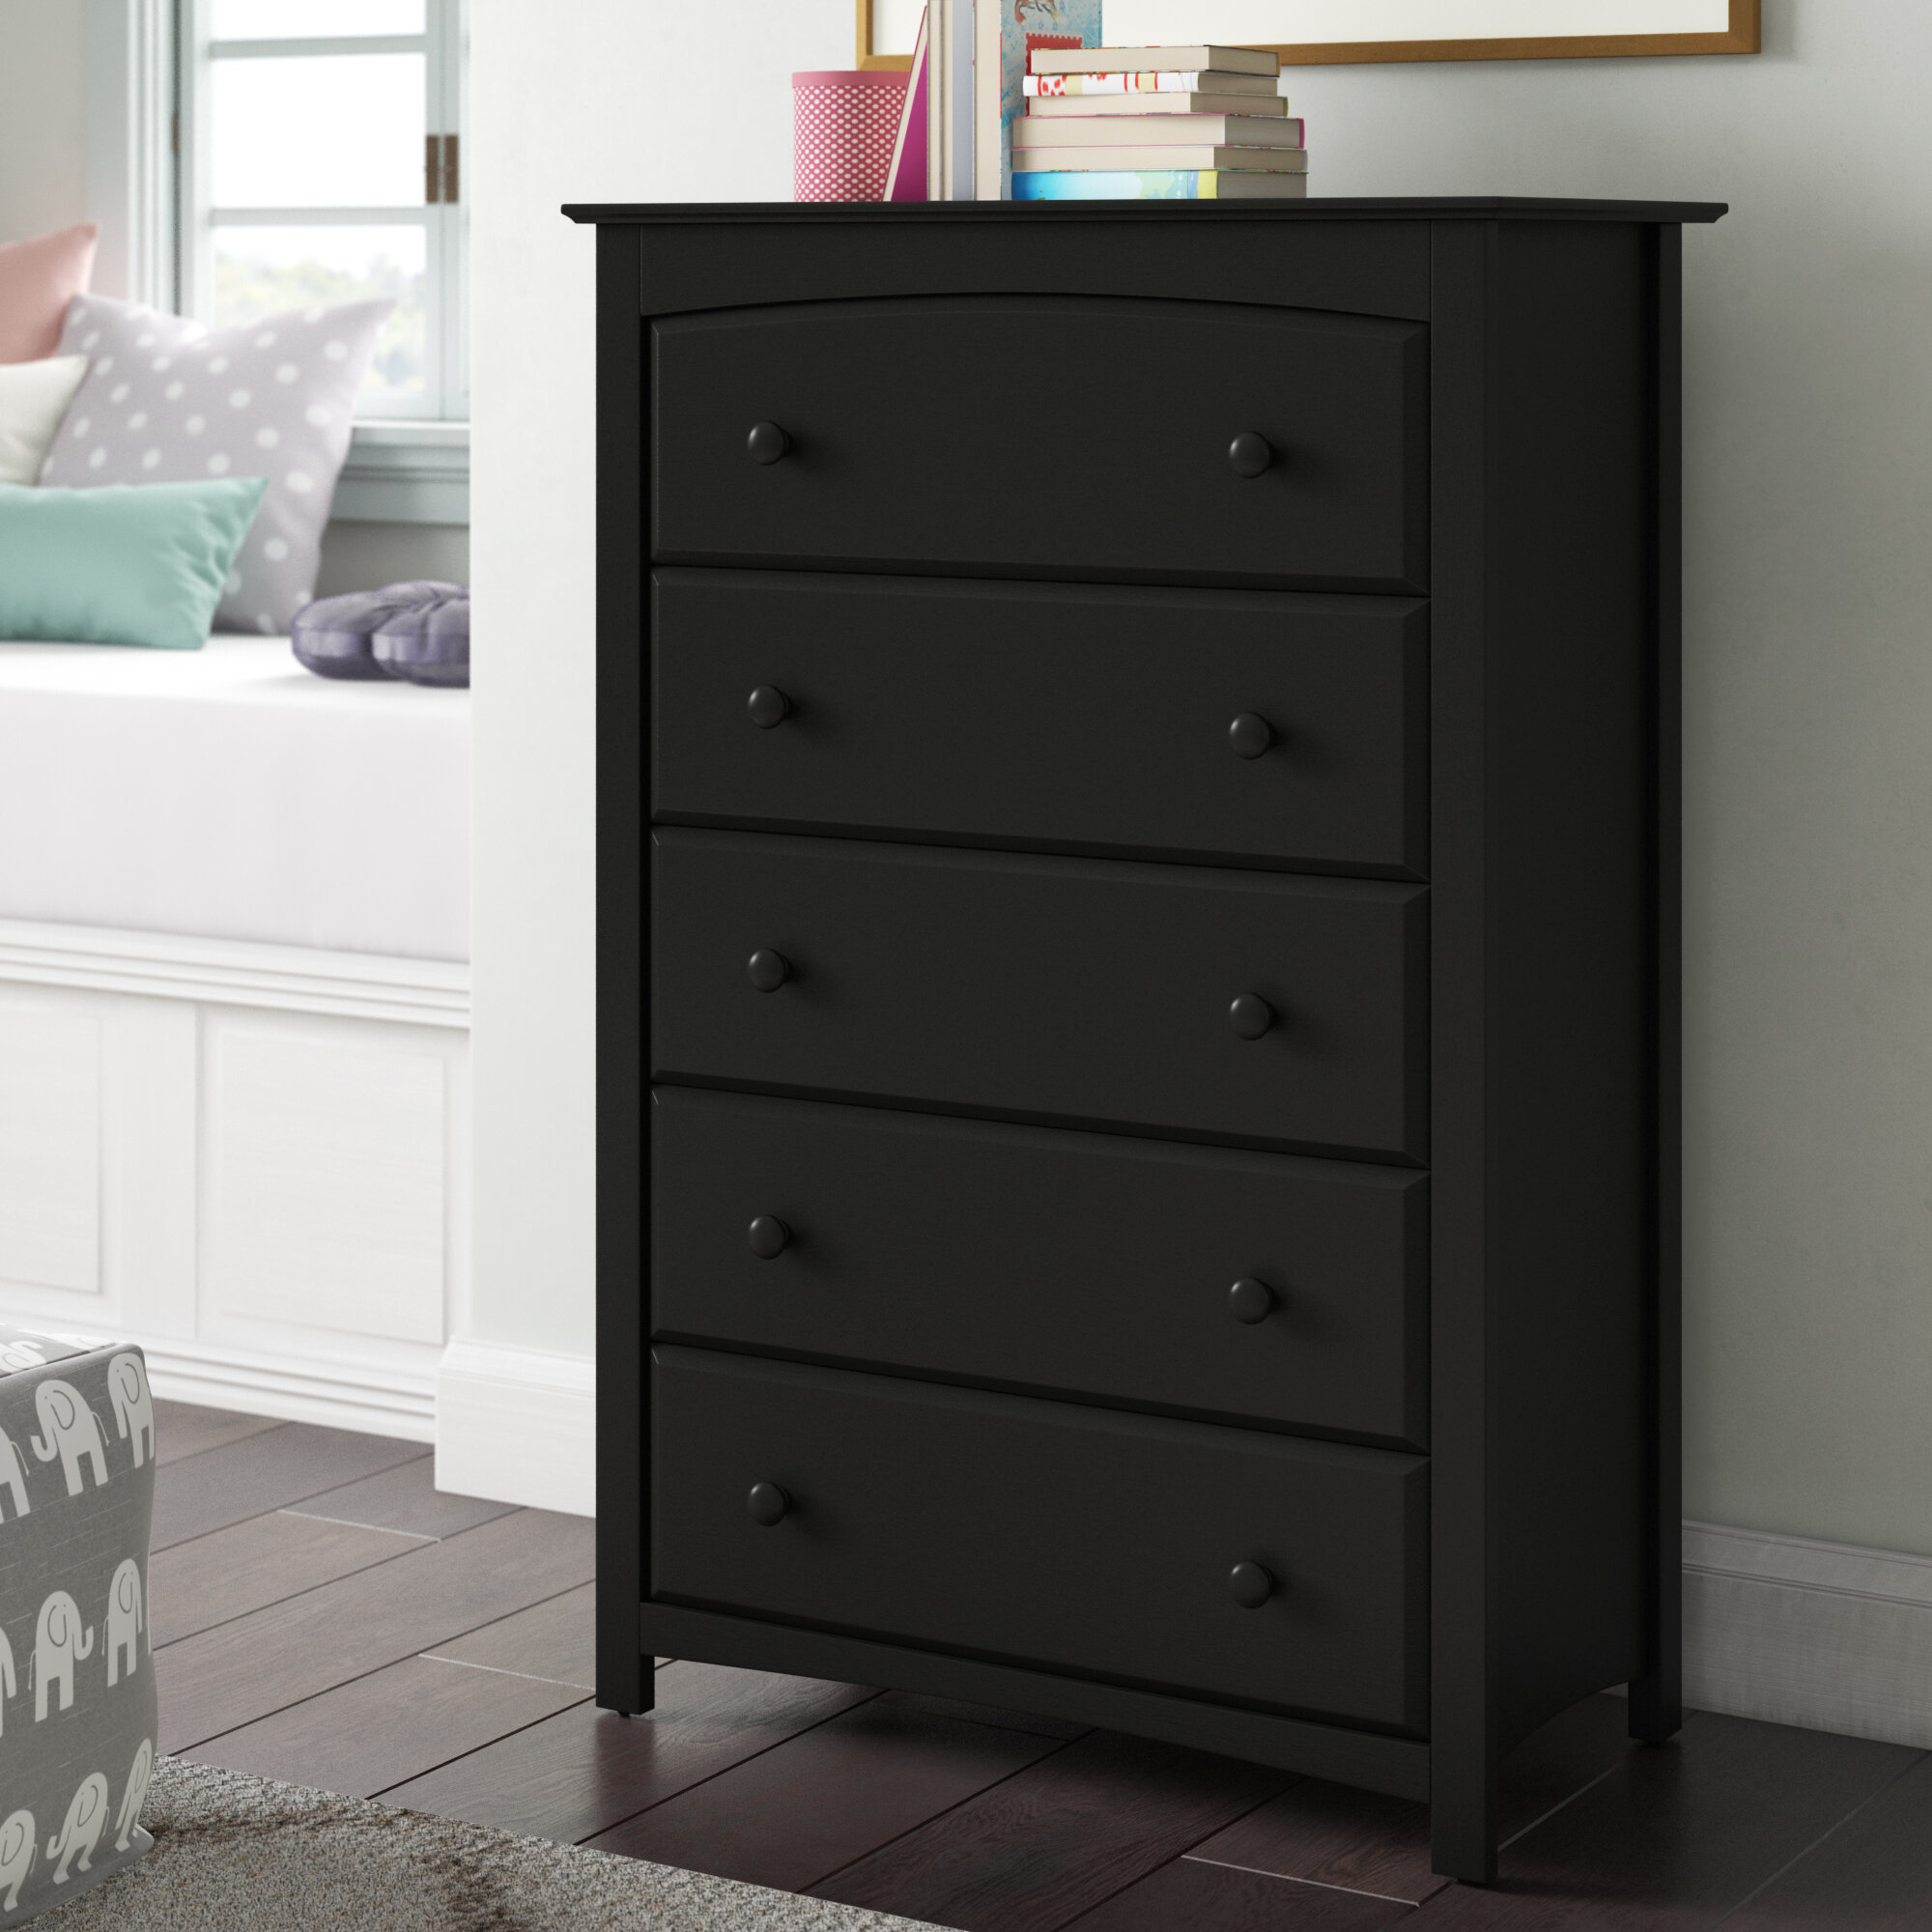 Pebble Gray Kids Bedroom Dresser with 5 Drawers Wood and Composite Construction Ideal for Nursery Toddlers Room Kids Room Storkcraft Kenton 5 Drawer Universal Dresser